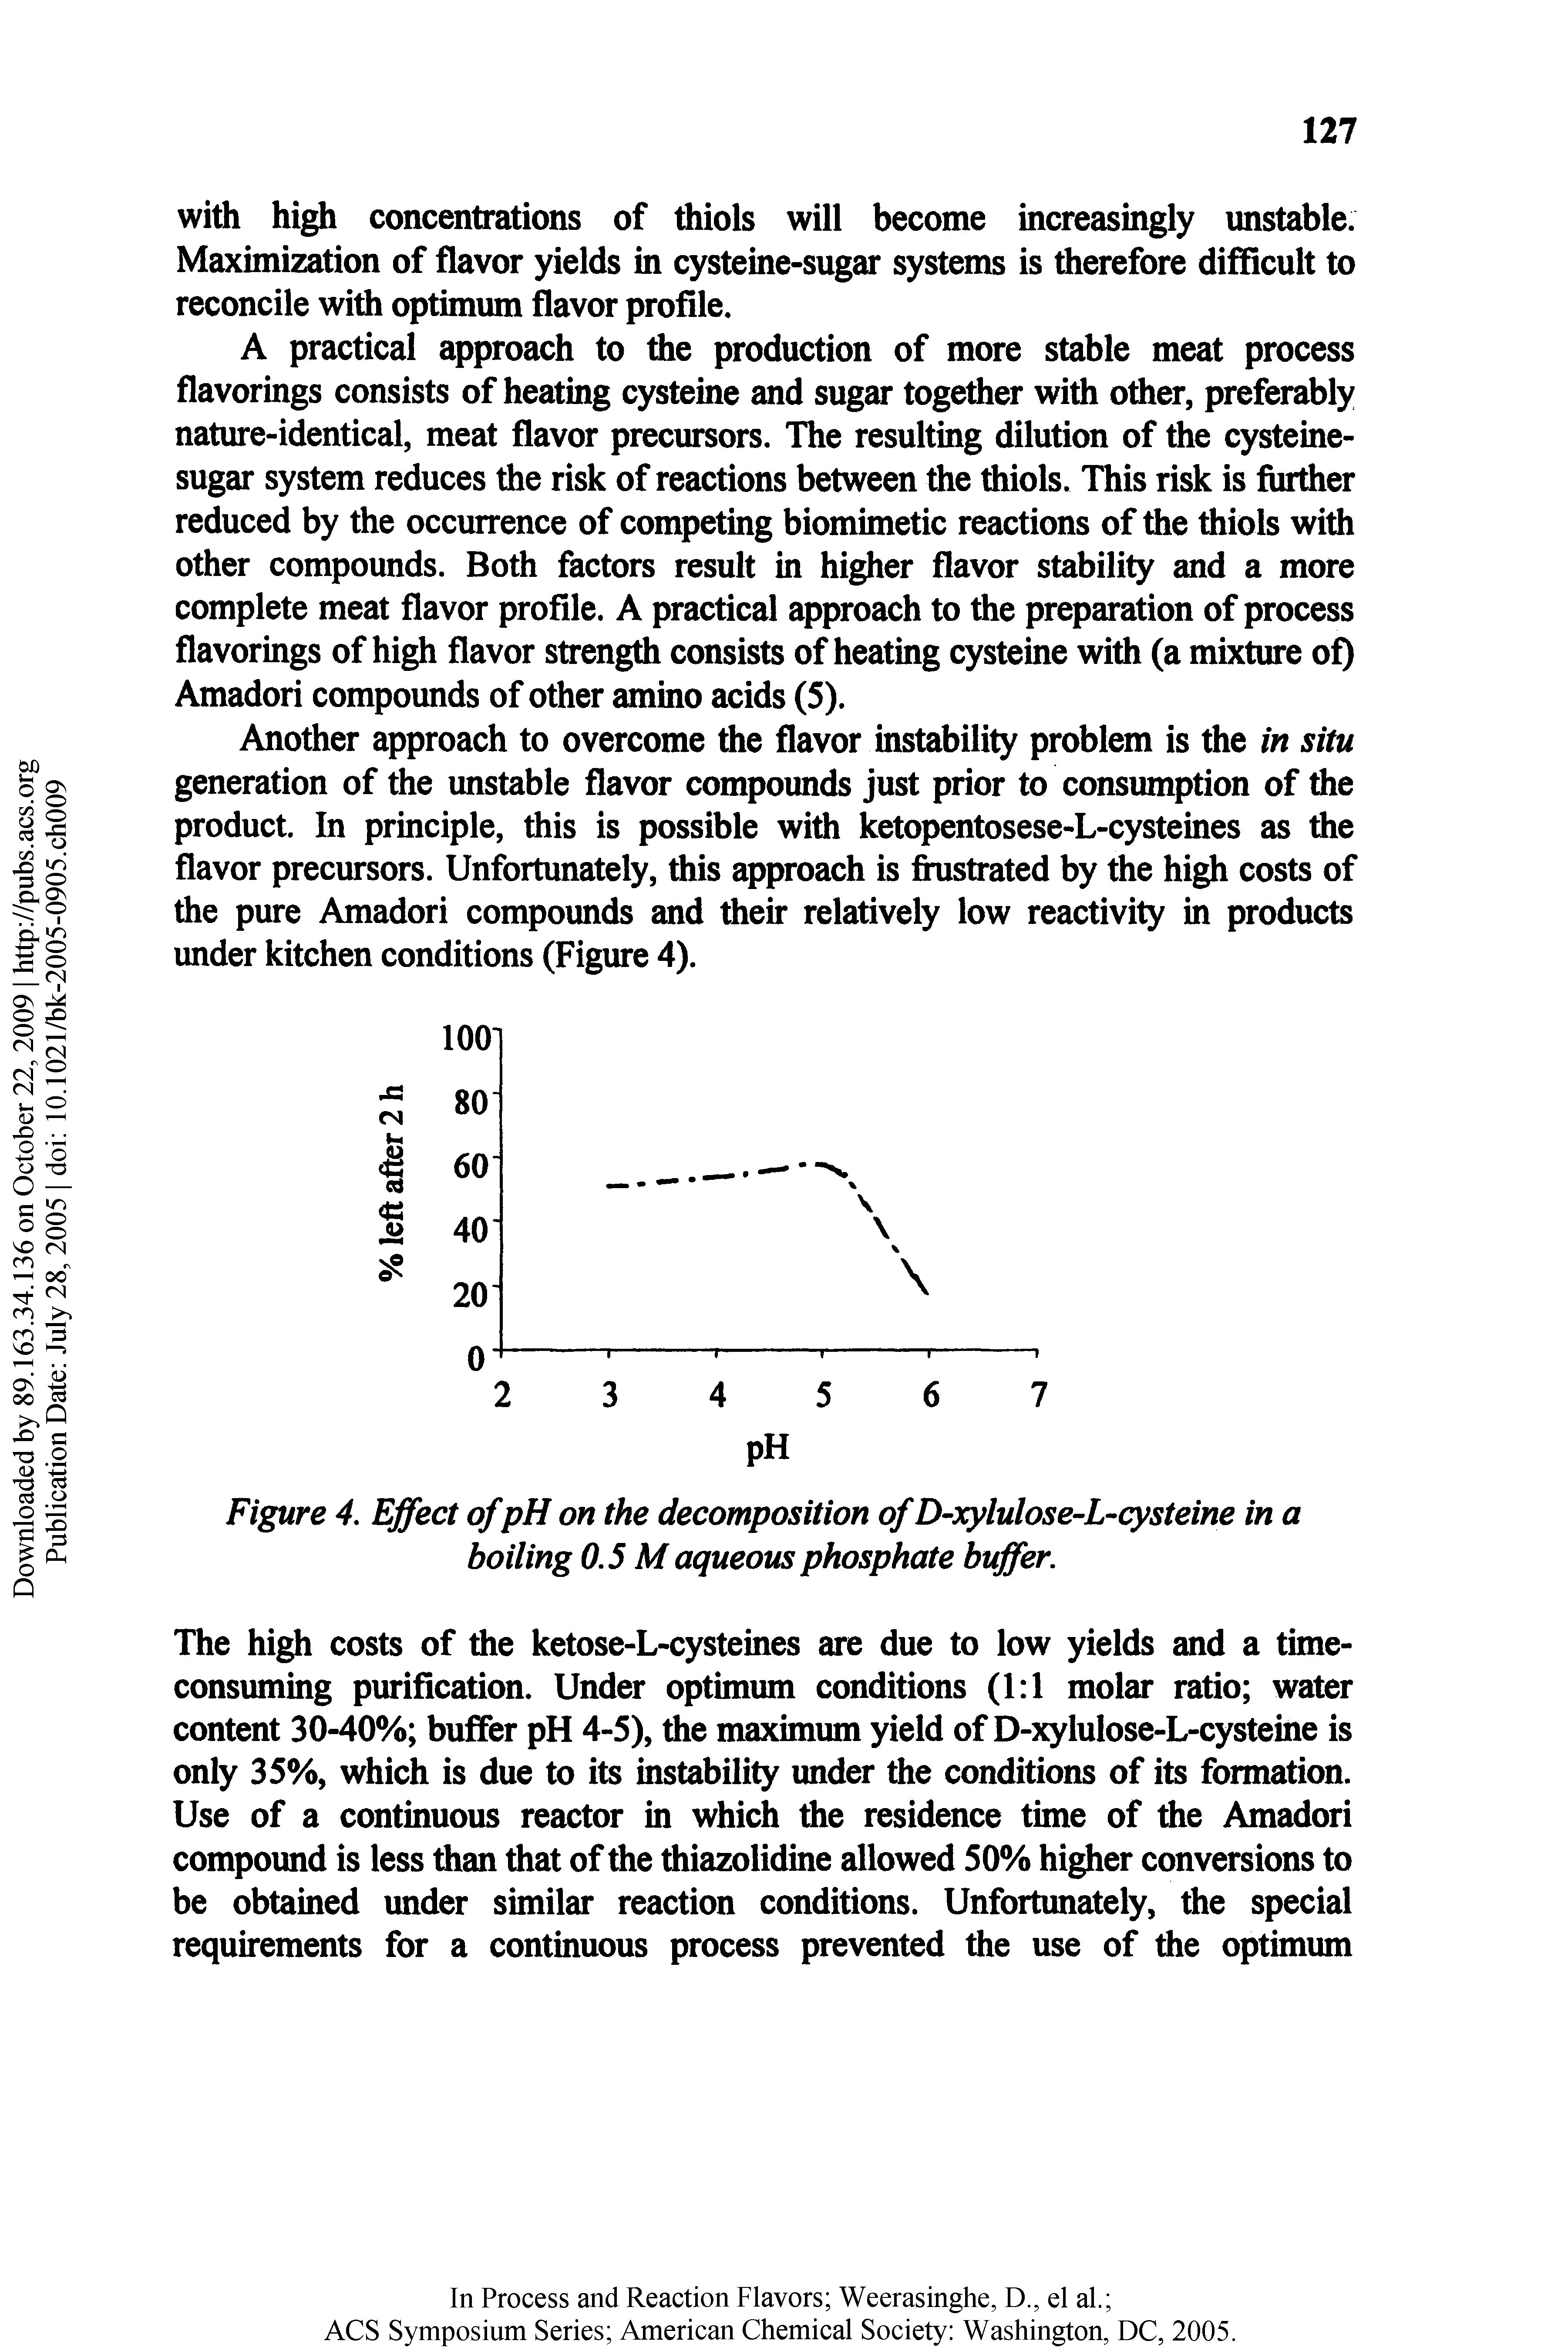 Figure 4. Effect of pH on the decomposition of D-xylulose-L-cysteine in a boiling 0.5 M aqueous phosphate bvffer.